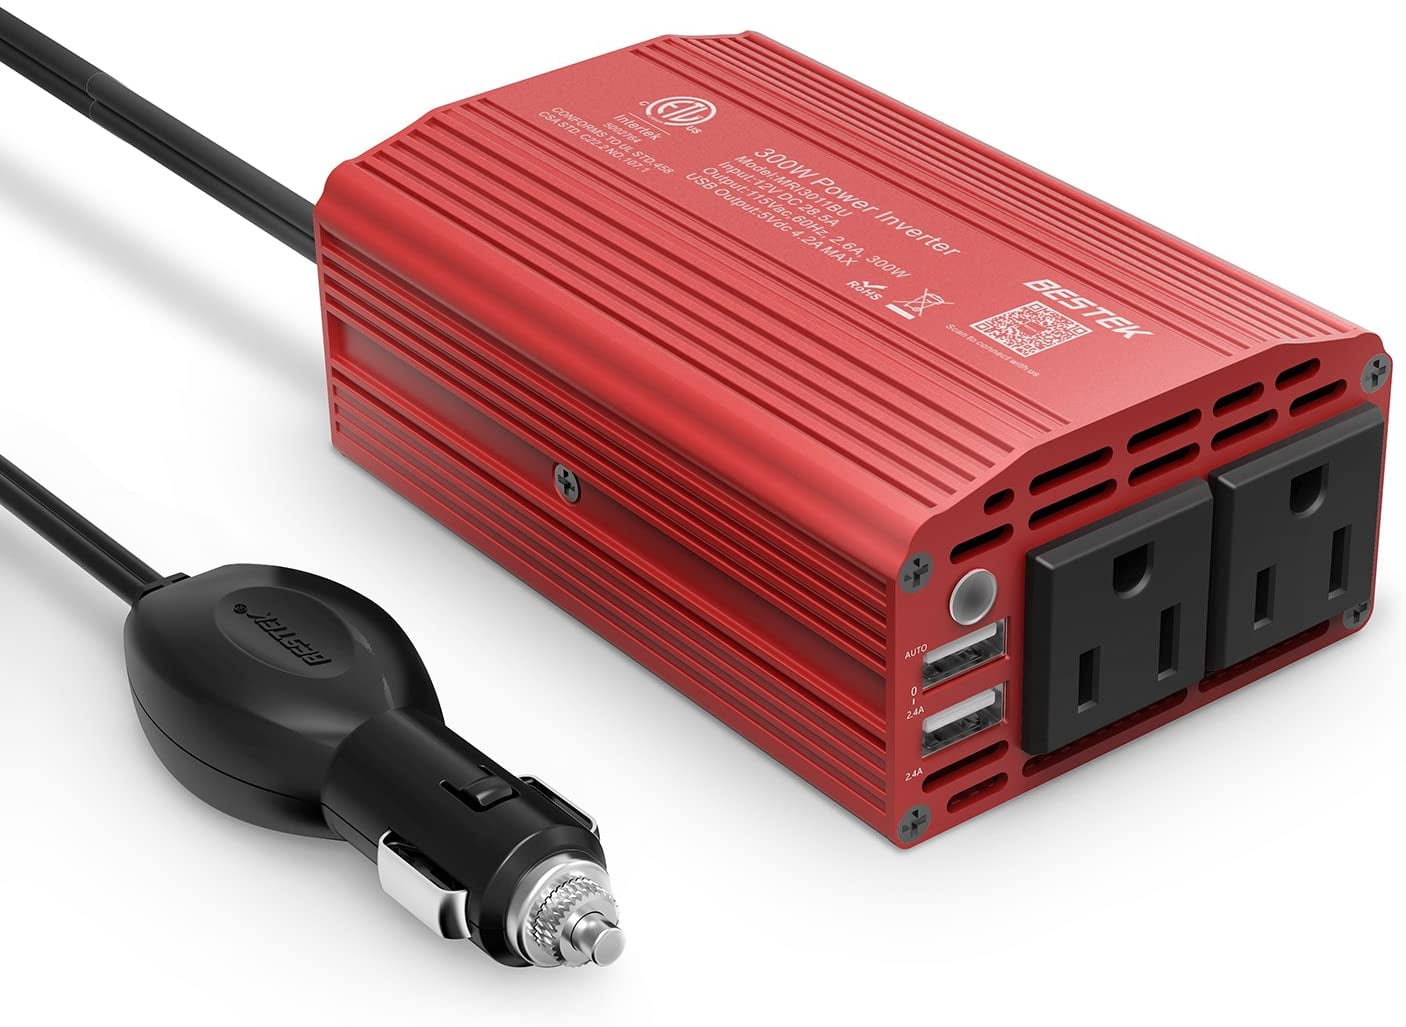 300W Power Inverter Modified Sine Wave Converter for Home Car RV with AC Outlets Converter DC 12V in to AC 110V Out